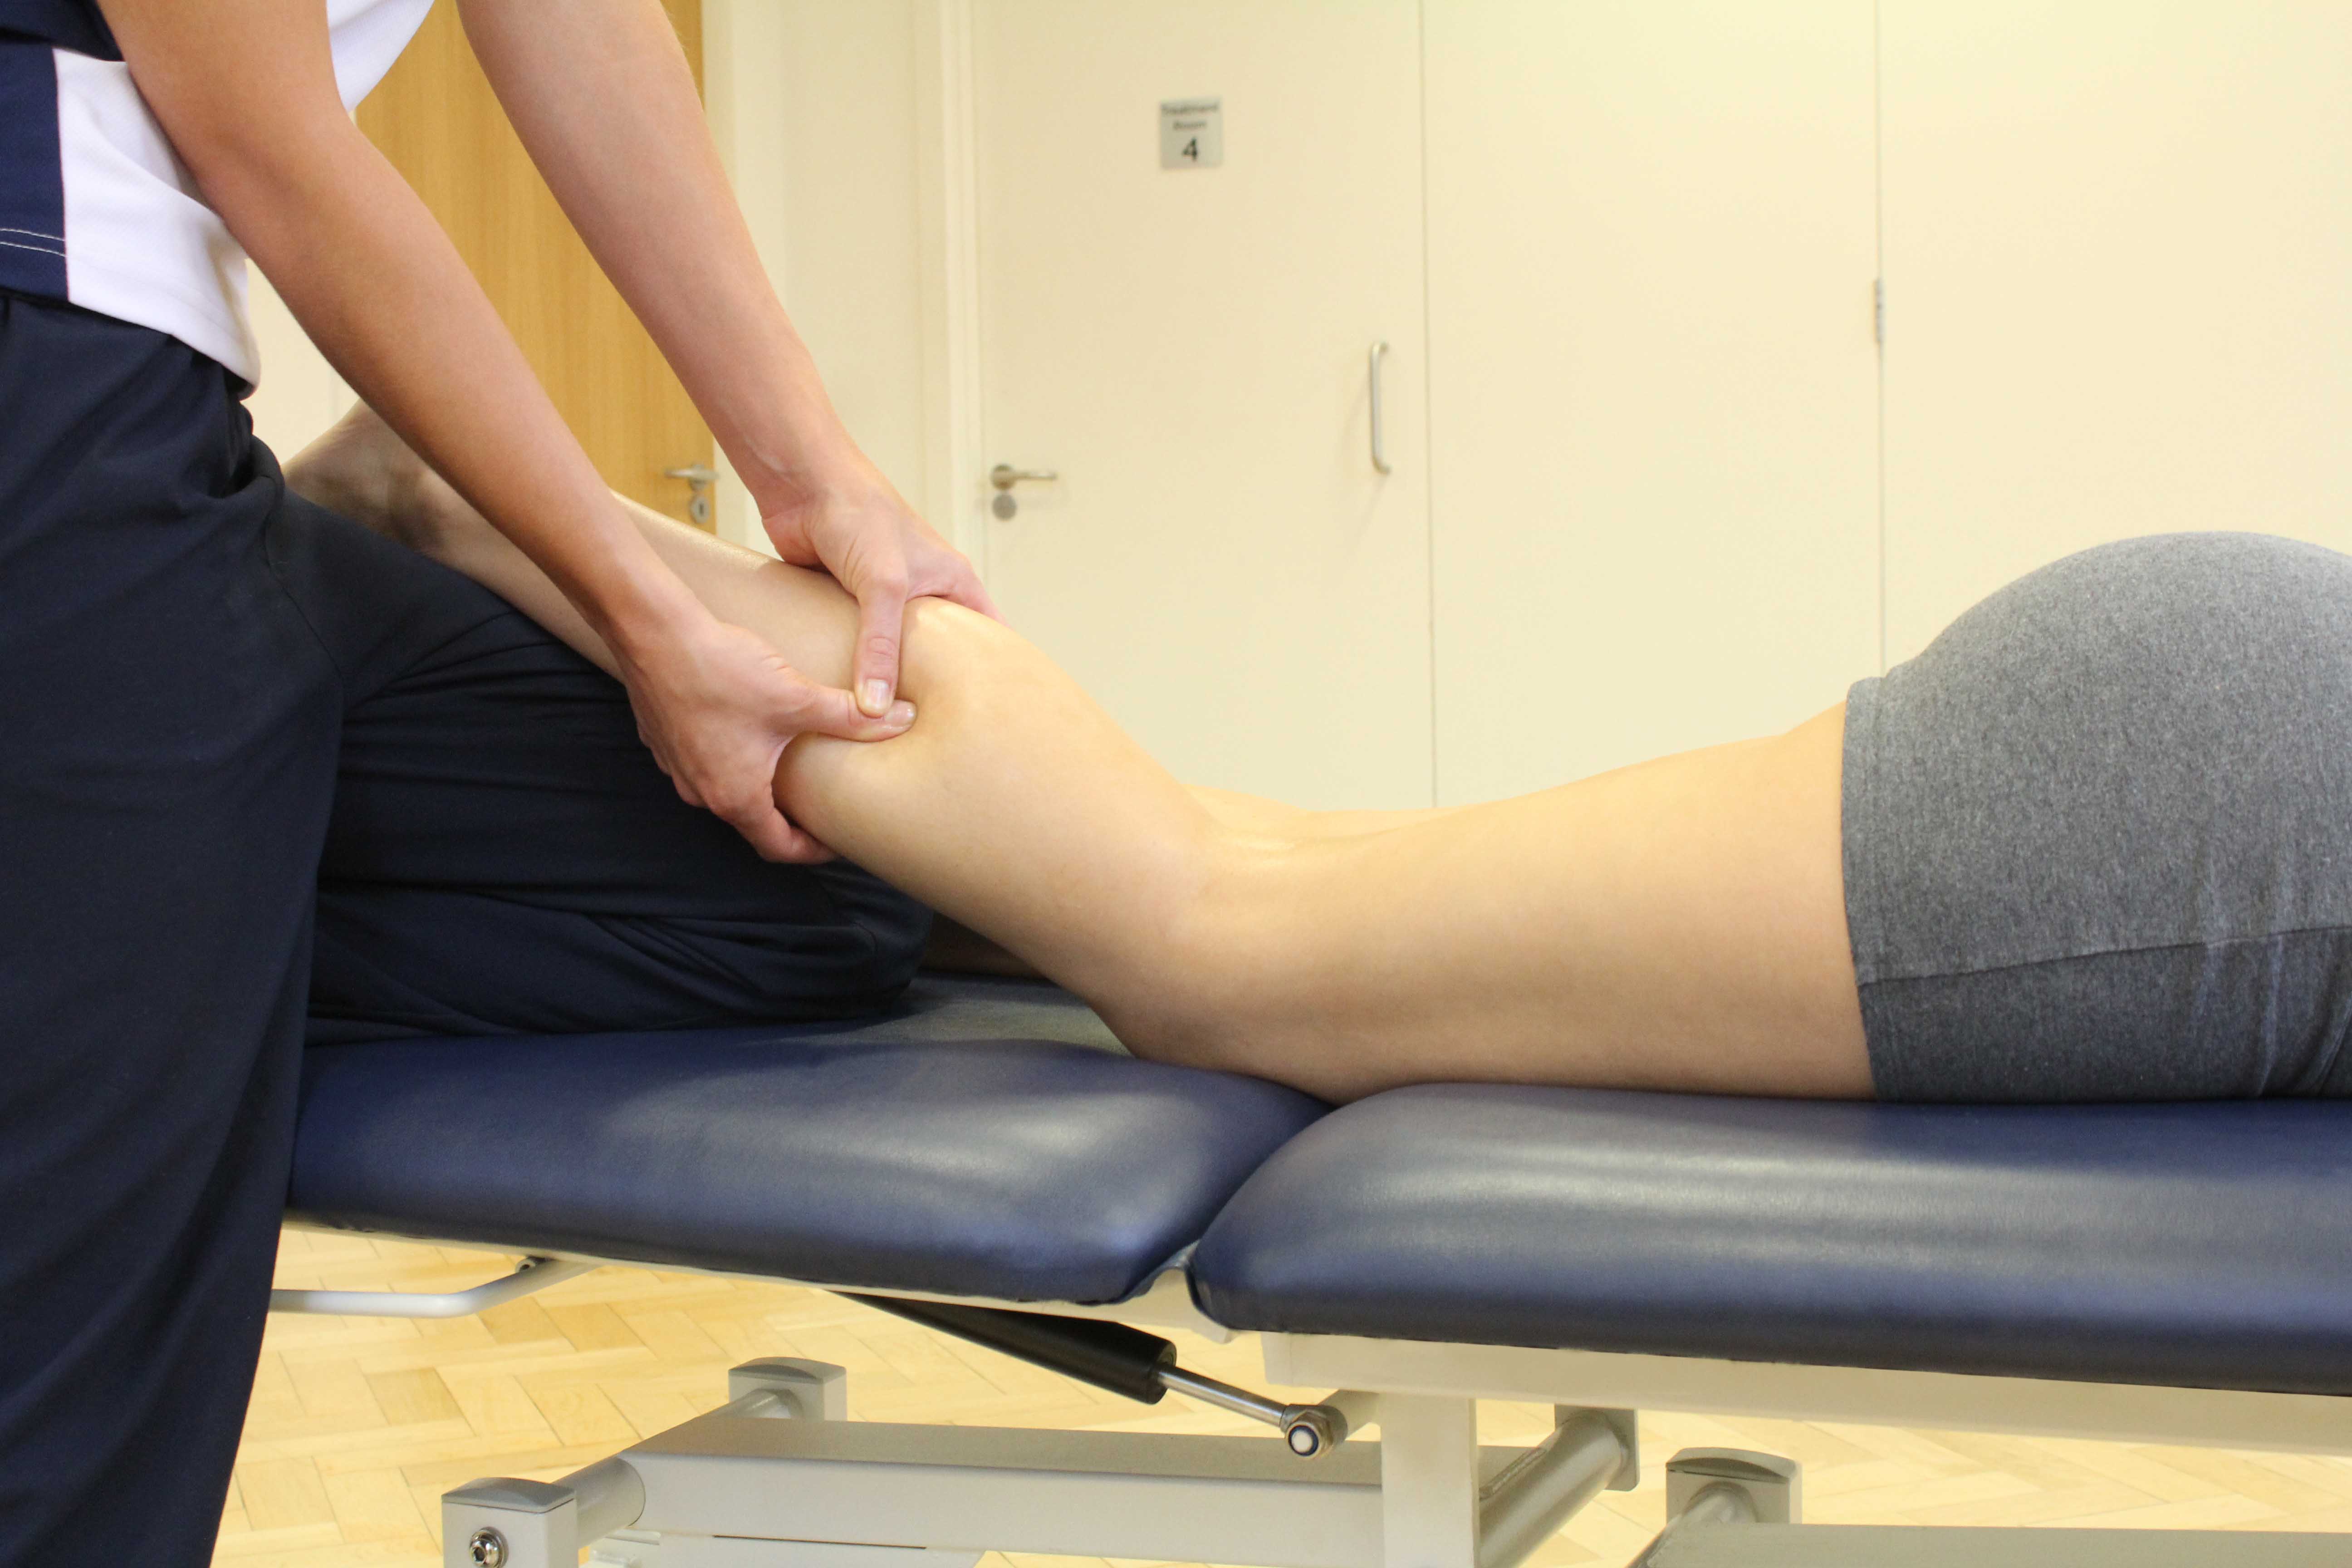 Shin pain can be extremely uncomfortable and may be a sign of shin splints